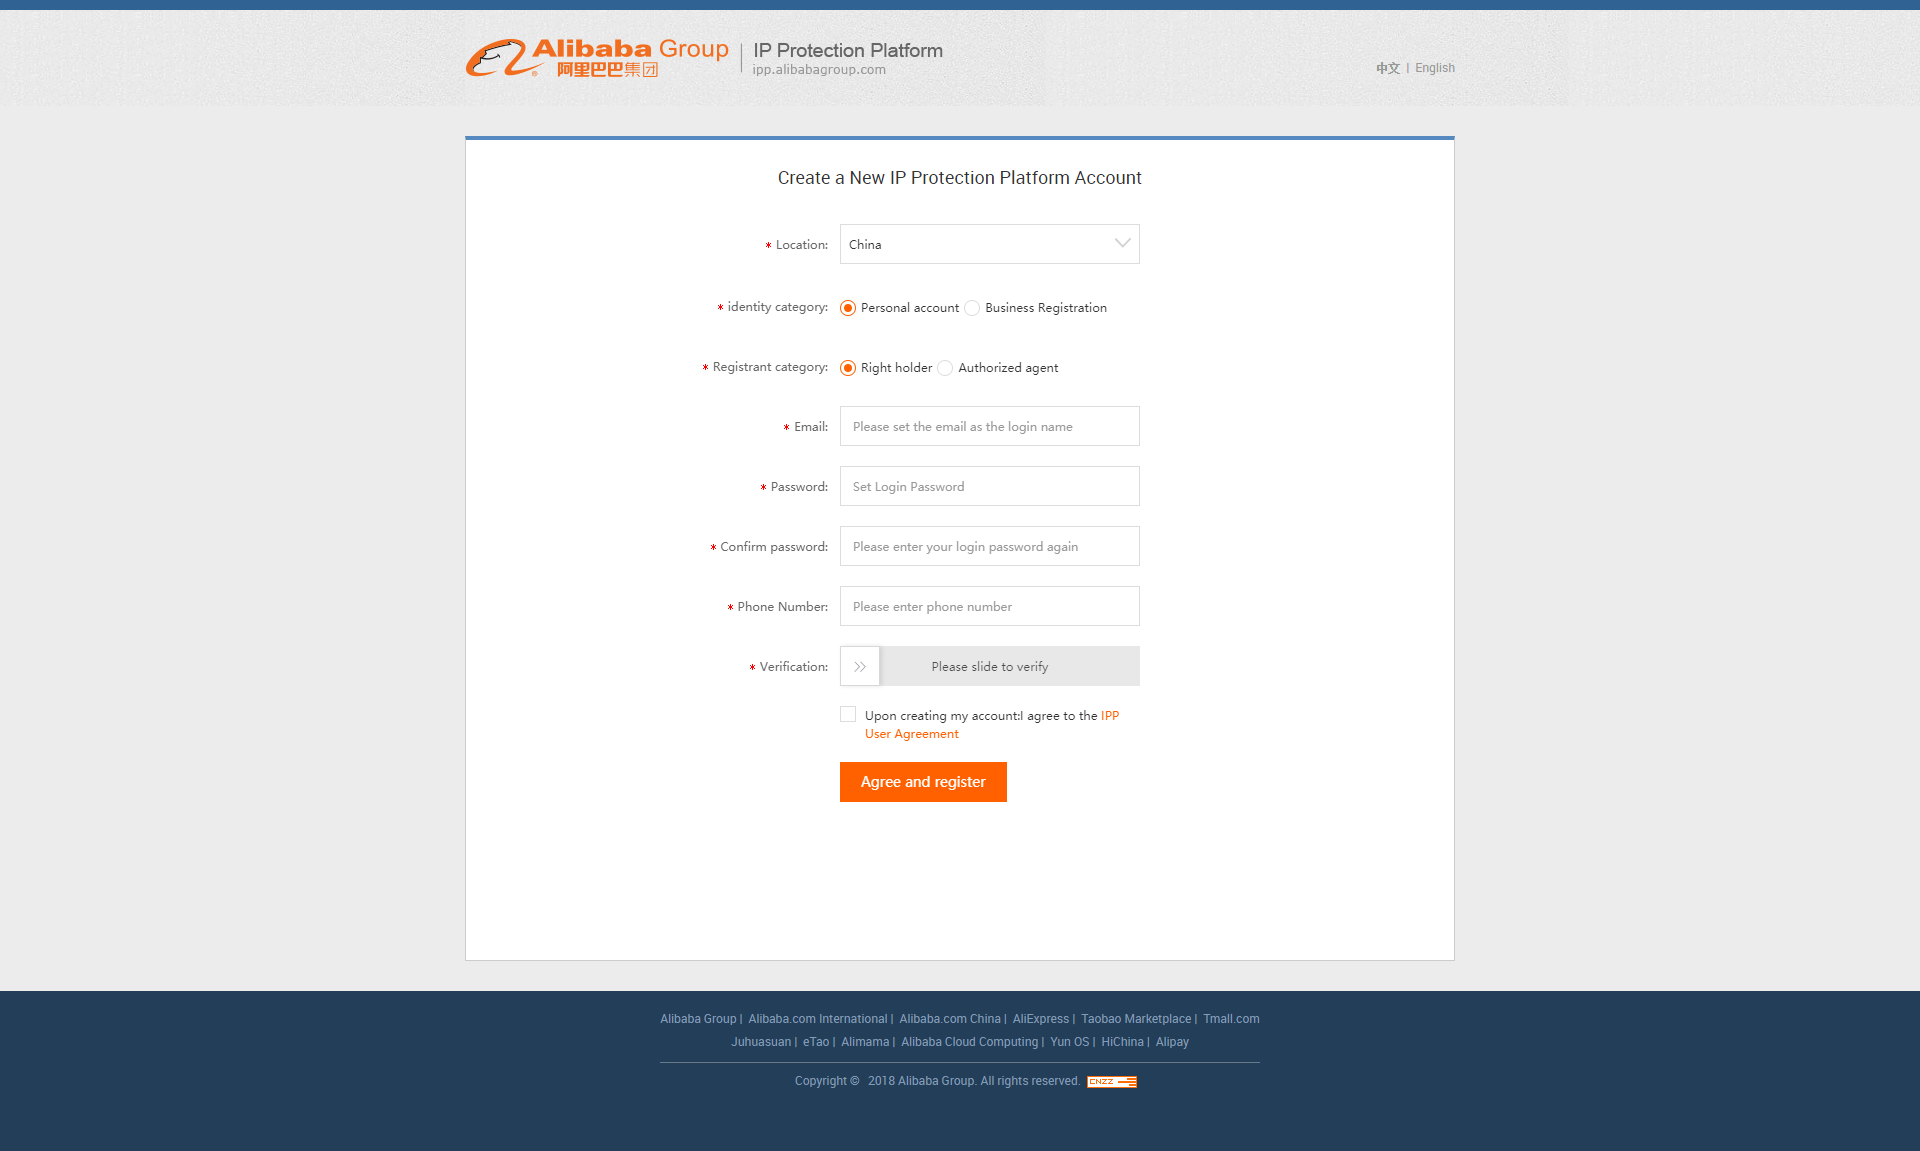 Alibaba's register account page